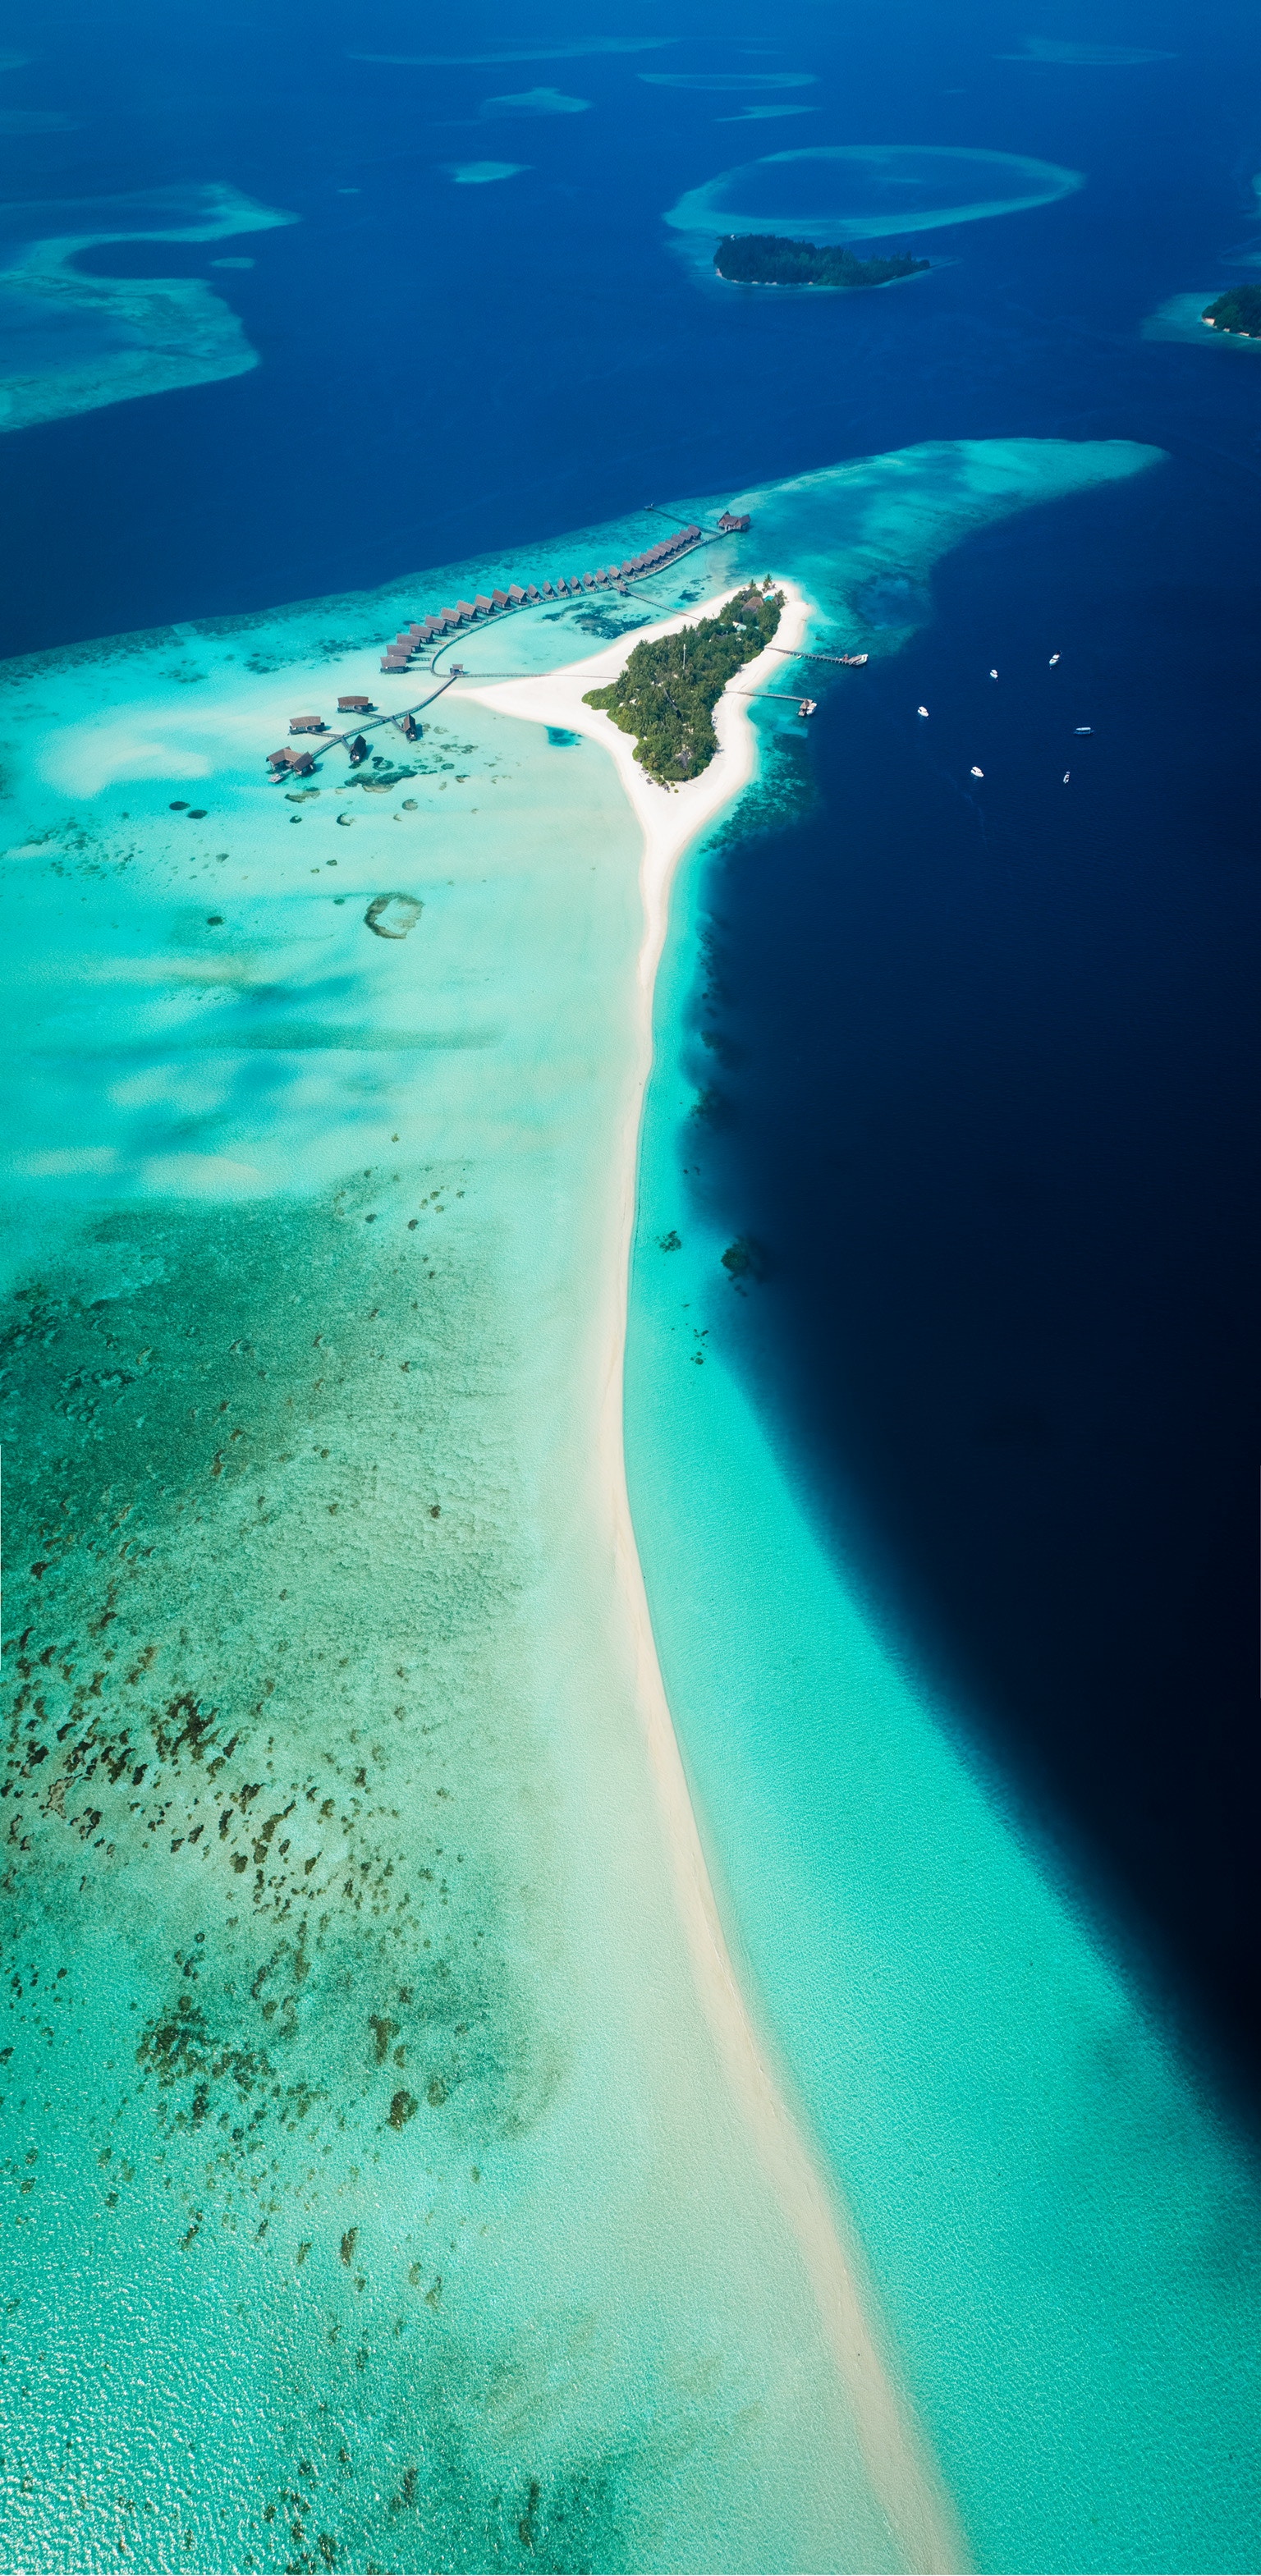 maldives, nature, view from above, ocean, tropics, island cellphone